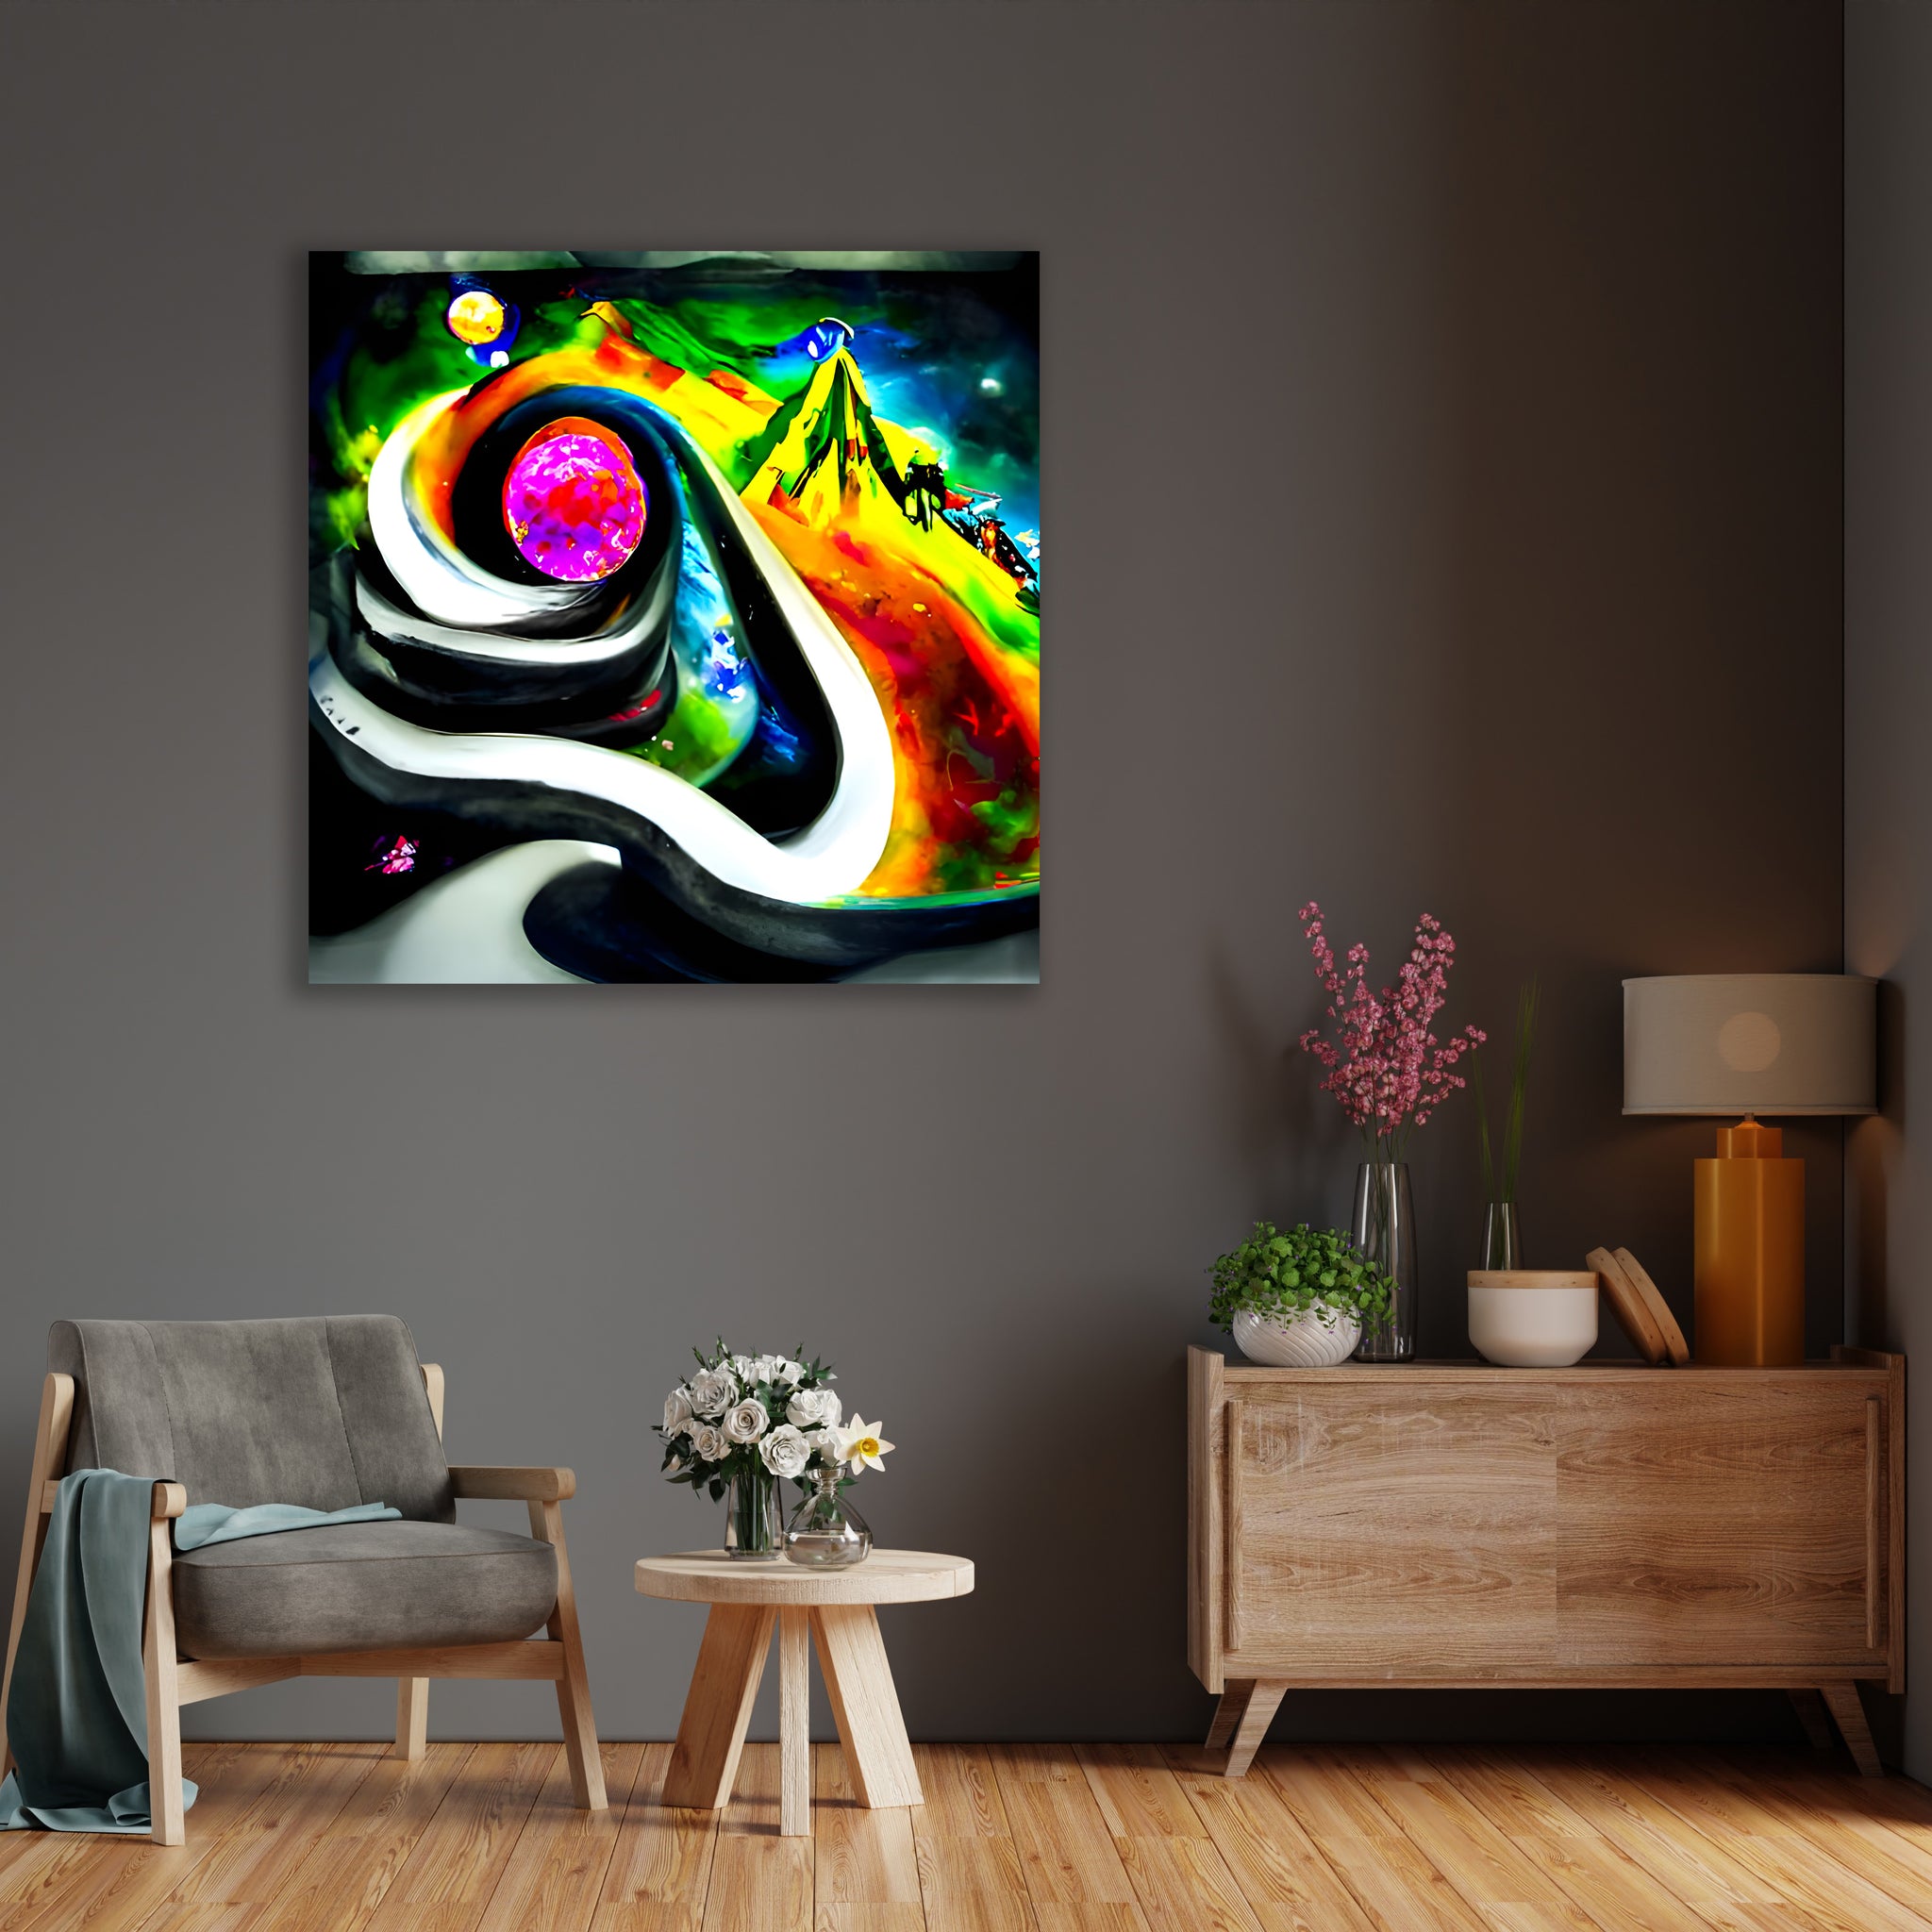 Do you want to slide down infinite mountains infinity street art colourful airbrush art watercolor cosmic moonscape spiraling